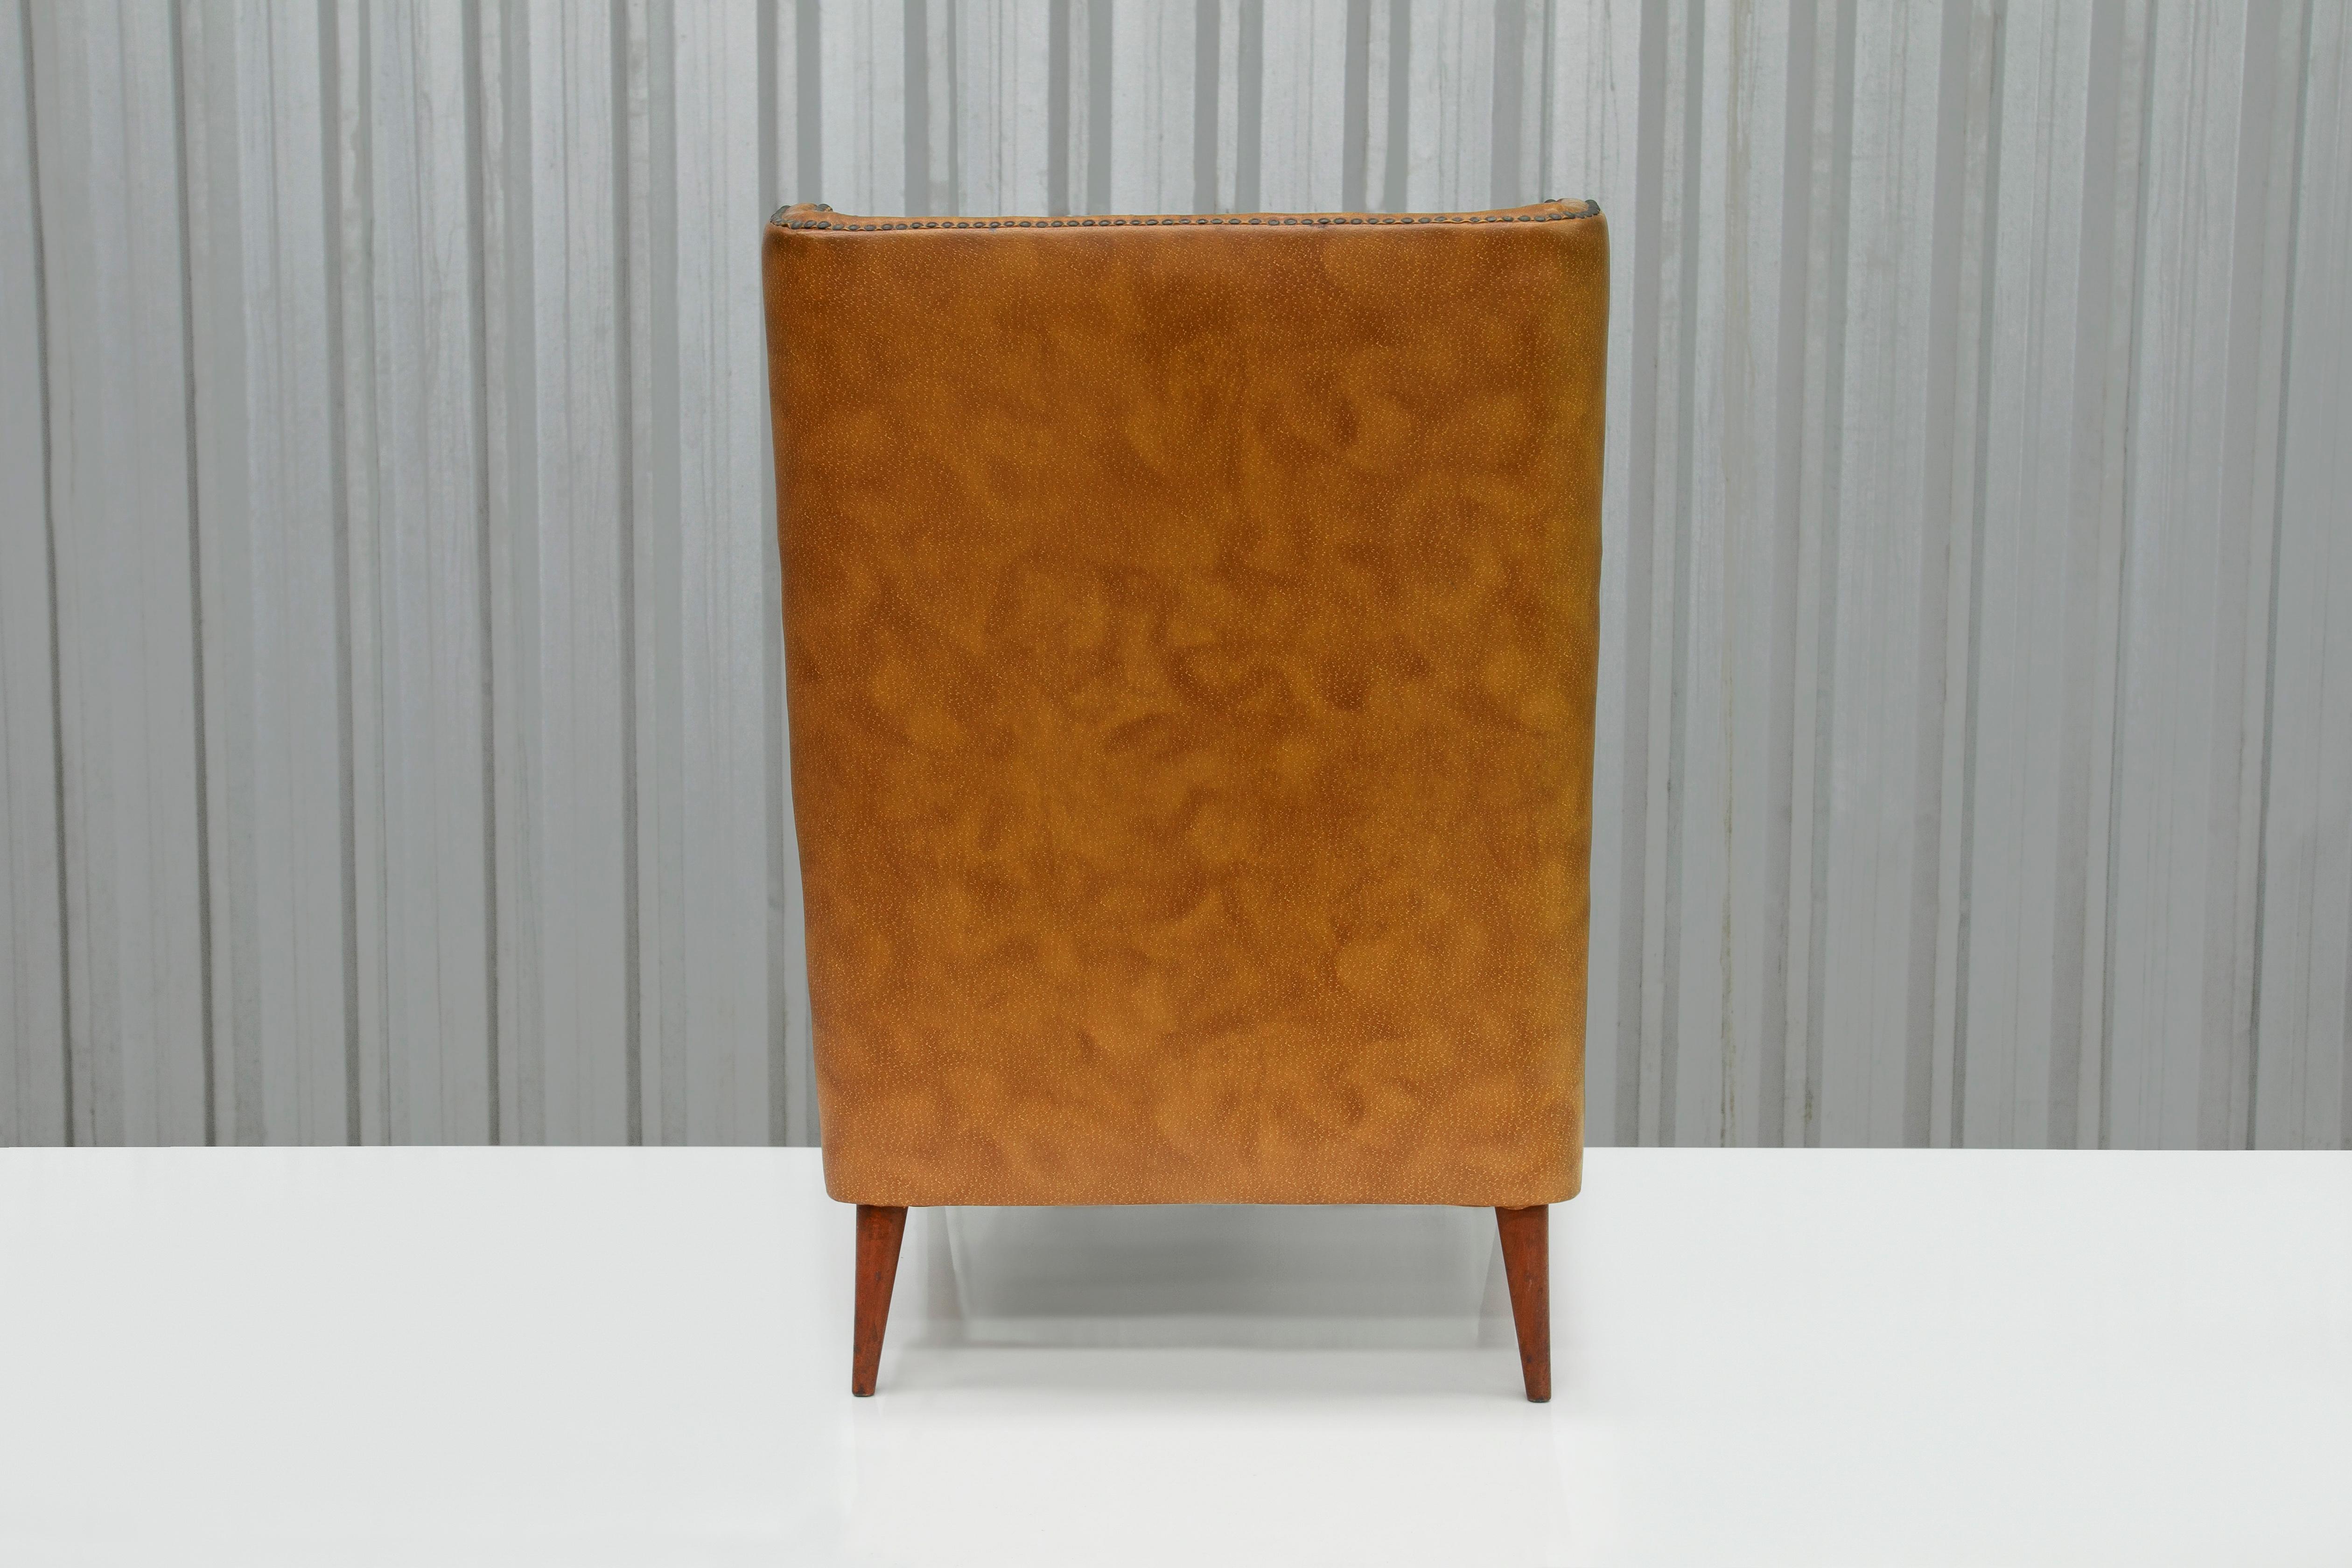 20th Century Brazilian Modern Armchair in Hardwood, Brown Leatherette, G. Scapinelli, 1950s For Sale